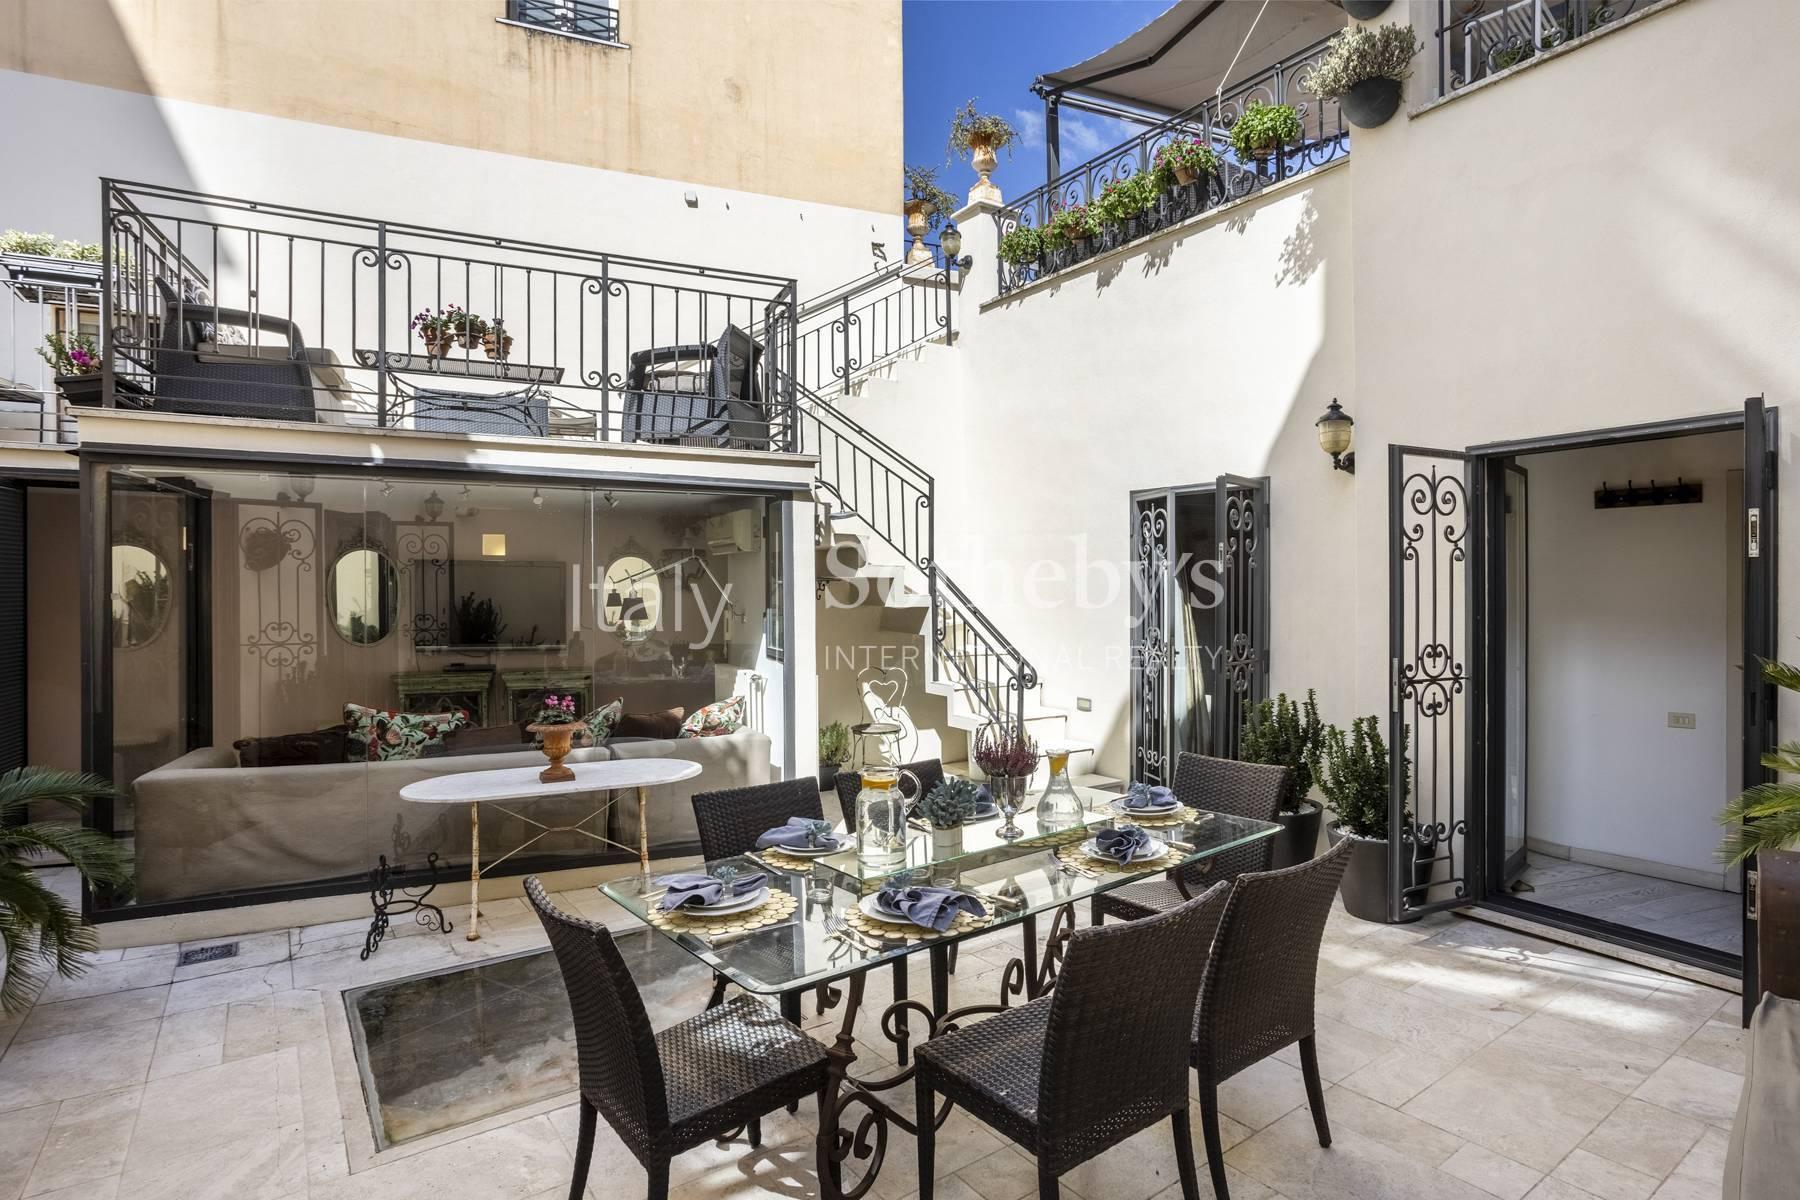 Apartment with terraces a stone's throw from Piazza Navona - 7